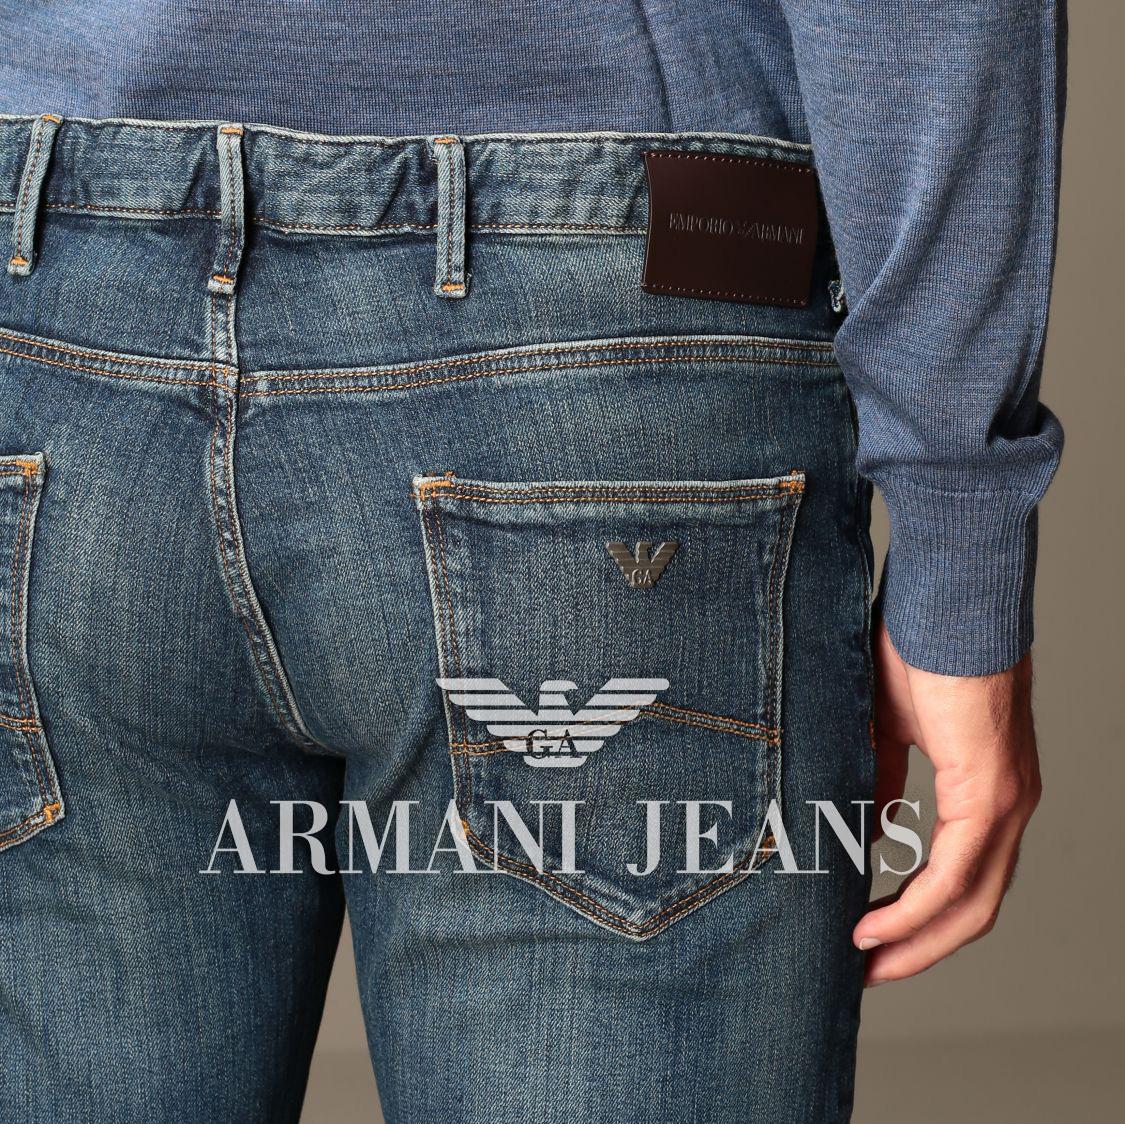 Armani Jeans Size Chart for and - size conversion & tips